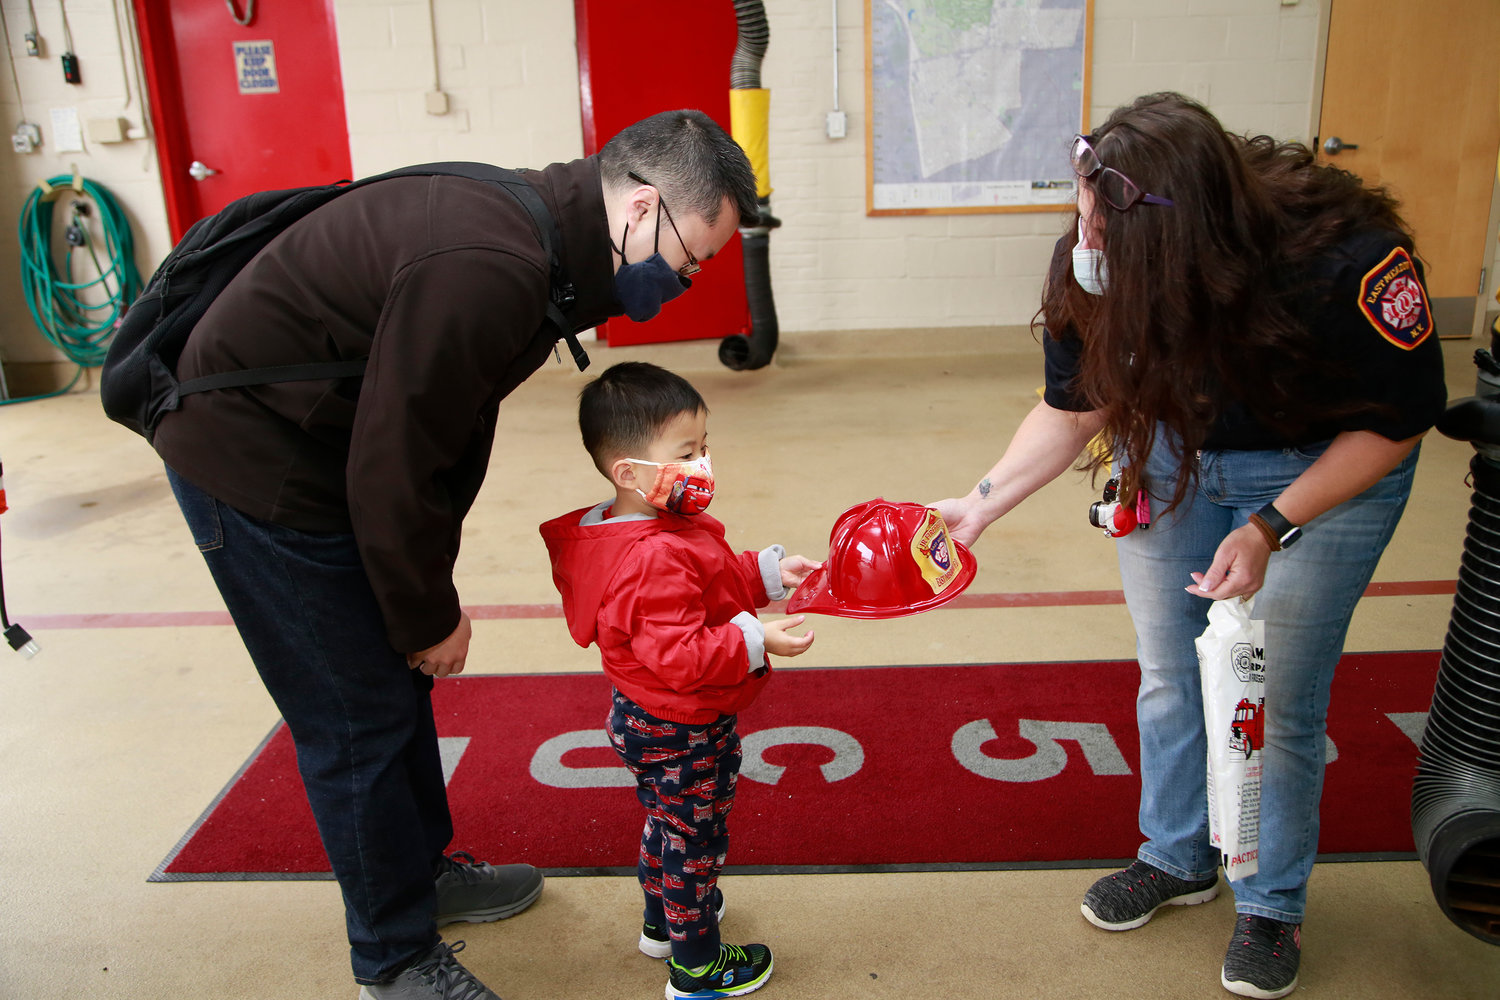 Donald Lim didn’t have to coax Theodore, 3, to accept a firefighter’s hat from Rescue Co. 5 Capt. Robin Fitzpatrick at RecruitNY last Sunday.